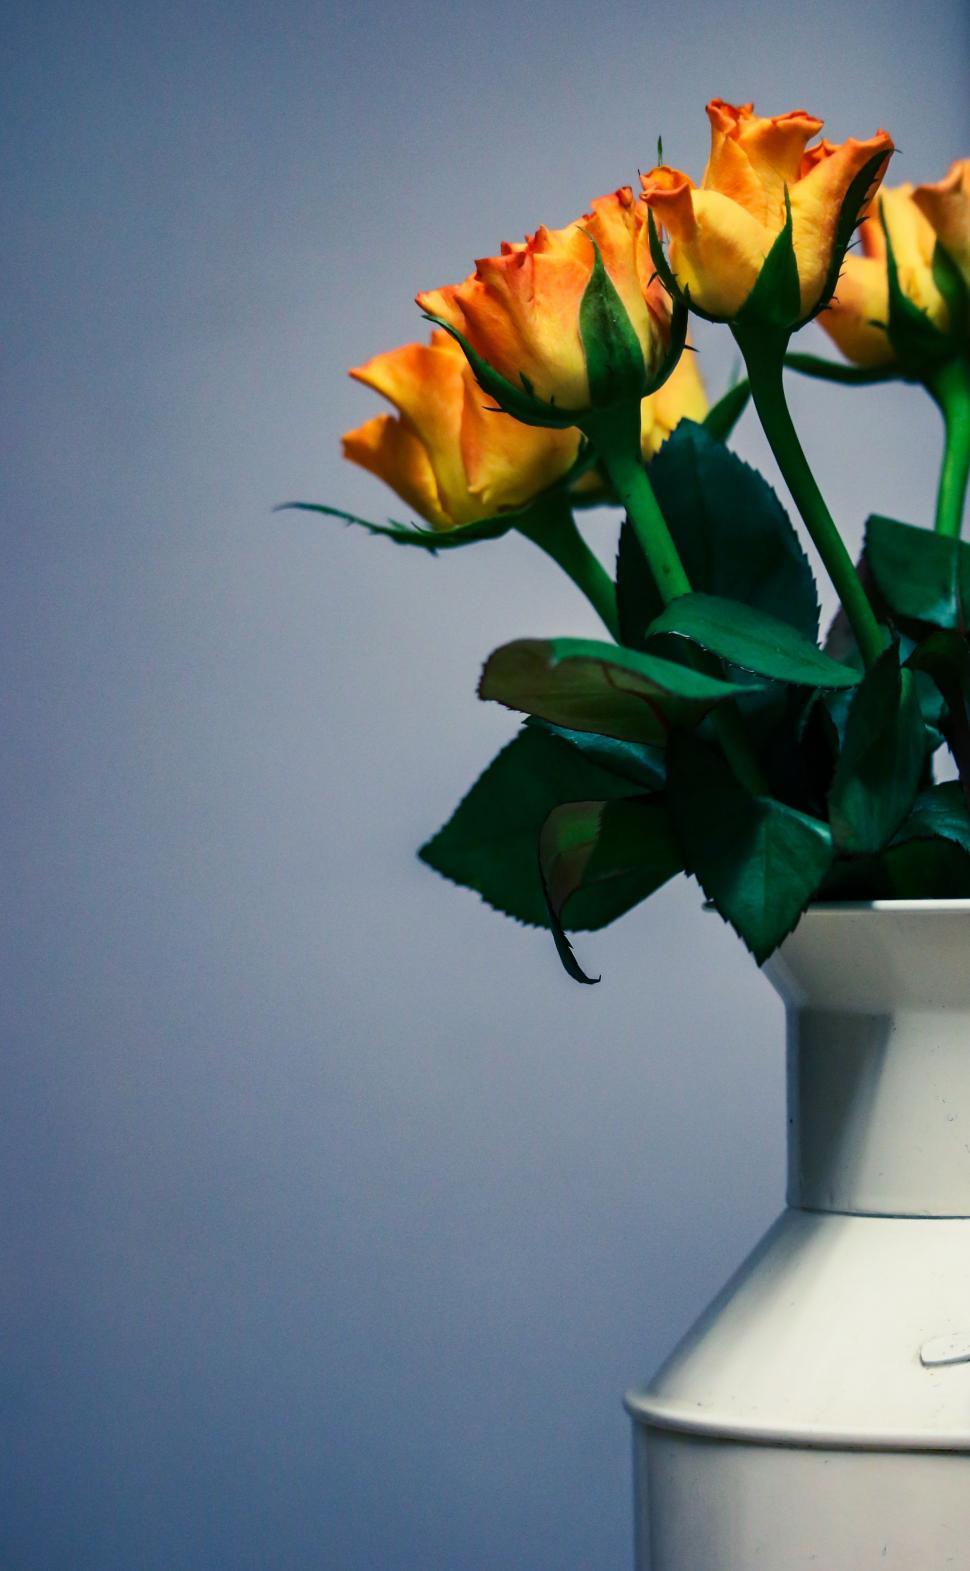 Free Image of White Vase With Yellow Roses on Table 